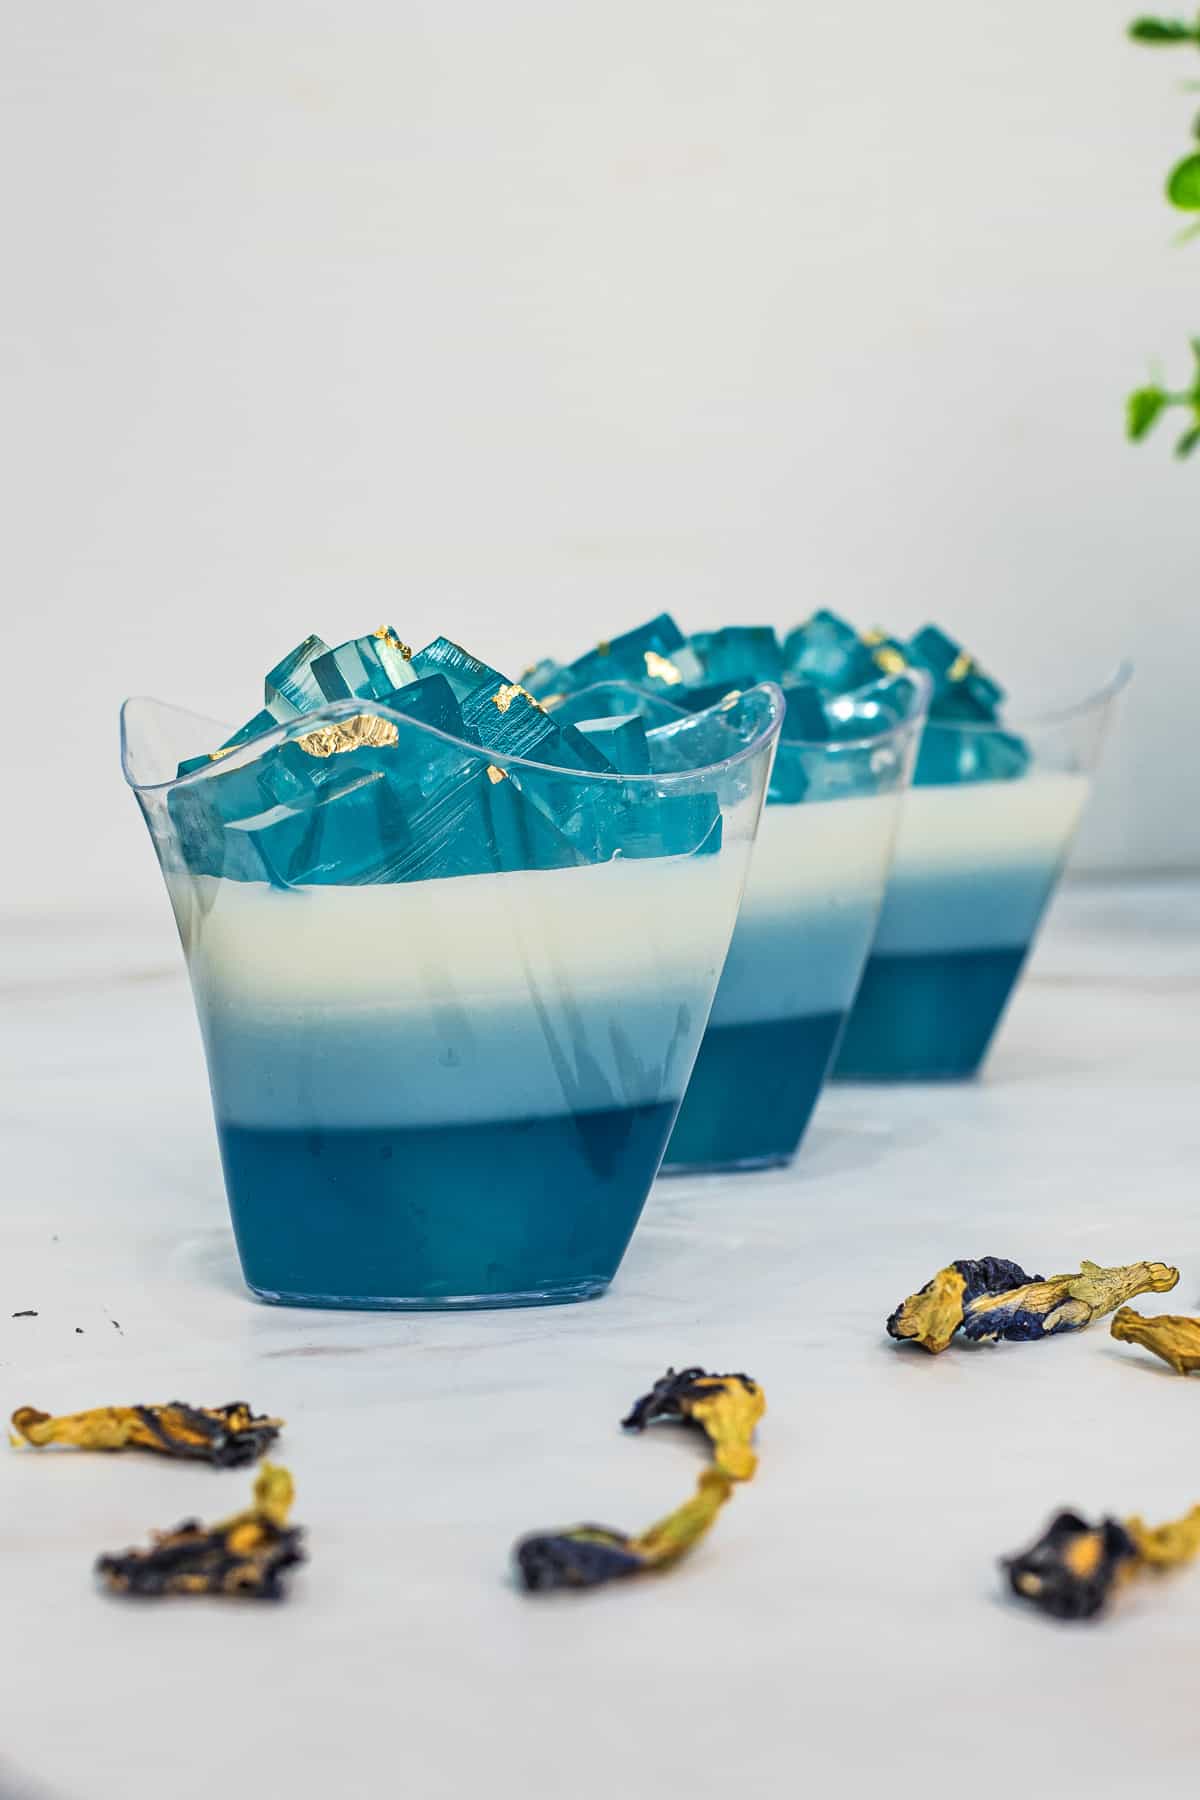 3 cups of layered blue butterfly pea jelly with tiny blue jelly cube topping.